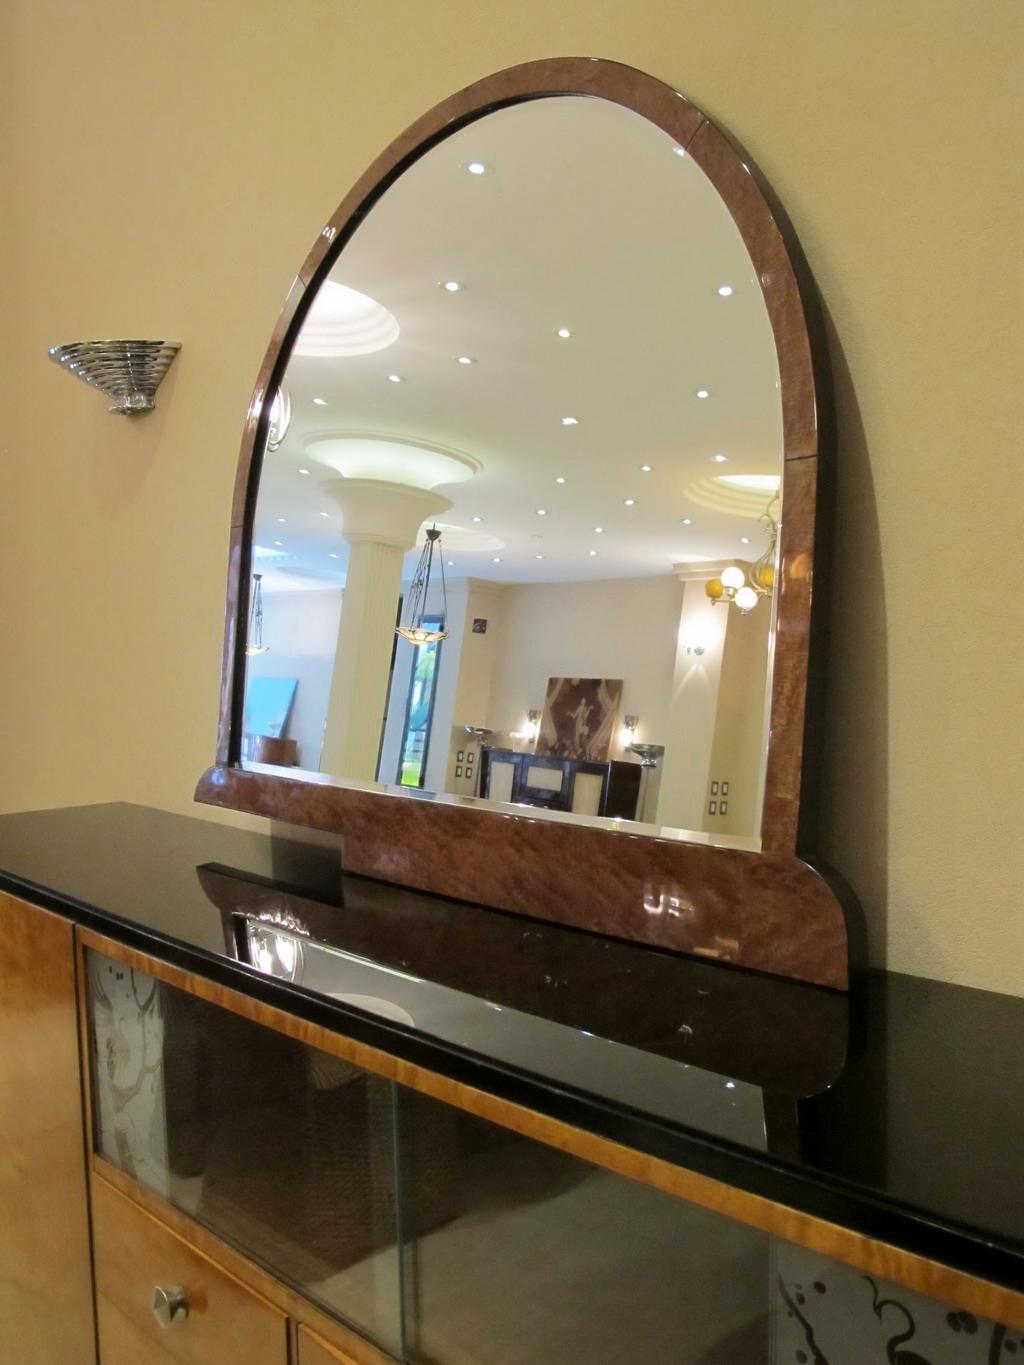 Amaizing mirror

Material: Wood
Style: Art Deco
Country: France
If you want to live in the golden years, this is the mirror that your project needs.
We have specialized in the sale of Art Deco and Art Nouveau and Vintage styles since 1982. If you